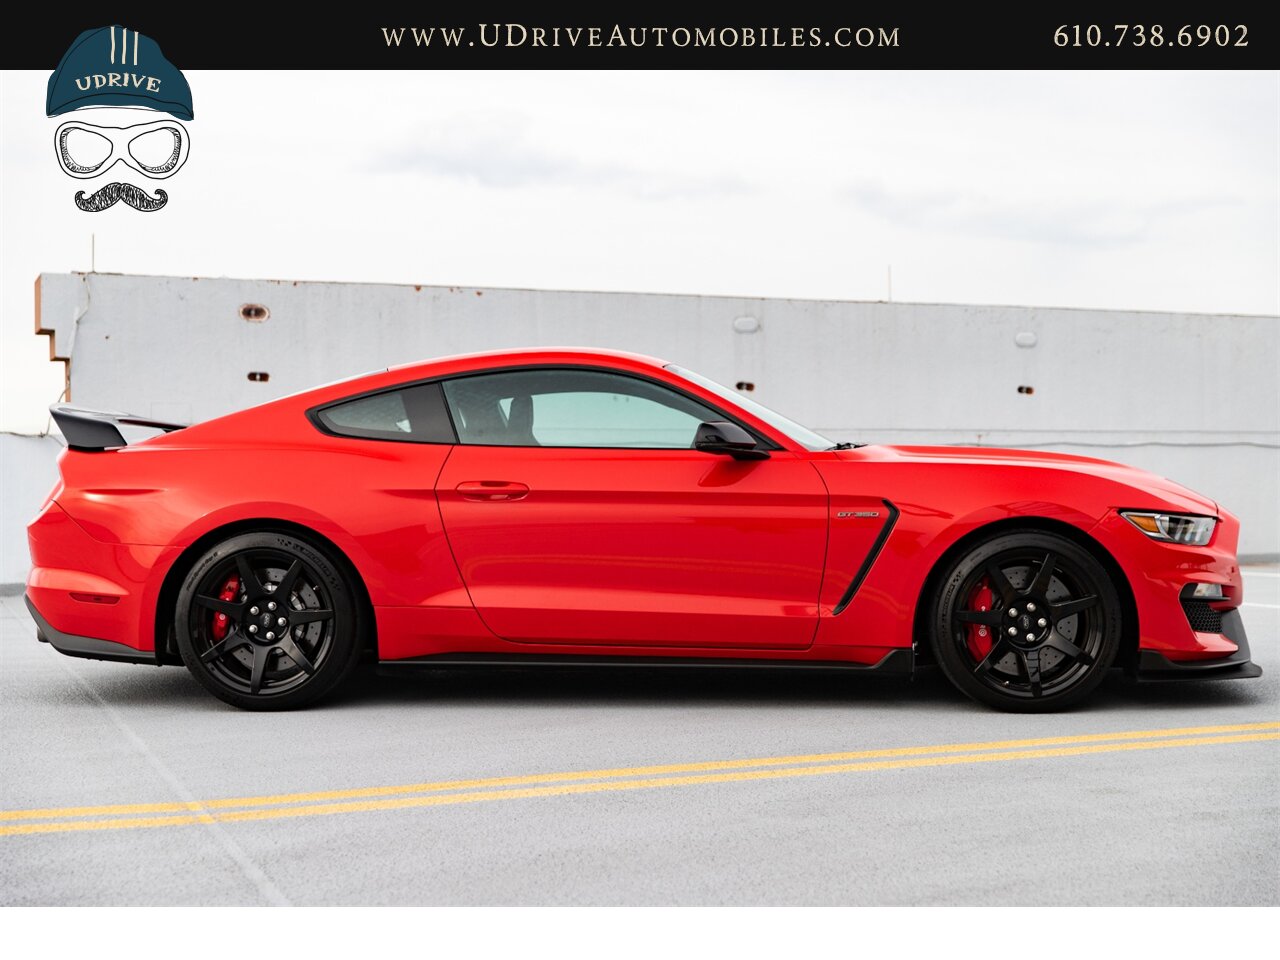 2016 Ford Mustang Shelby GT350R 3k Miles Electronics Pkg  1 of 32 Race Red Produced for USA As New - Photo 21 - West Chester, PA 19382